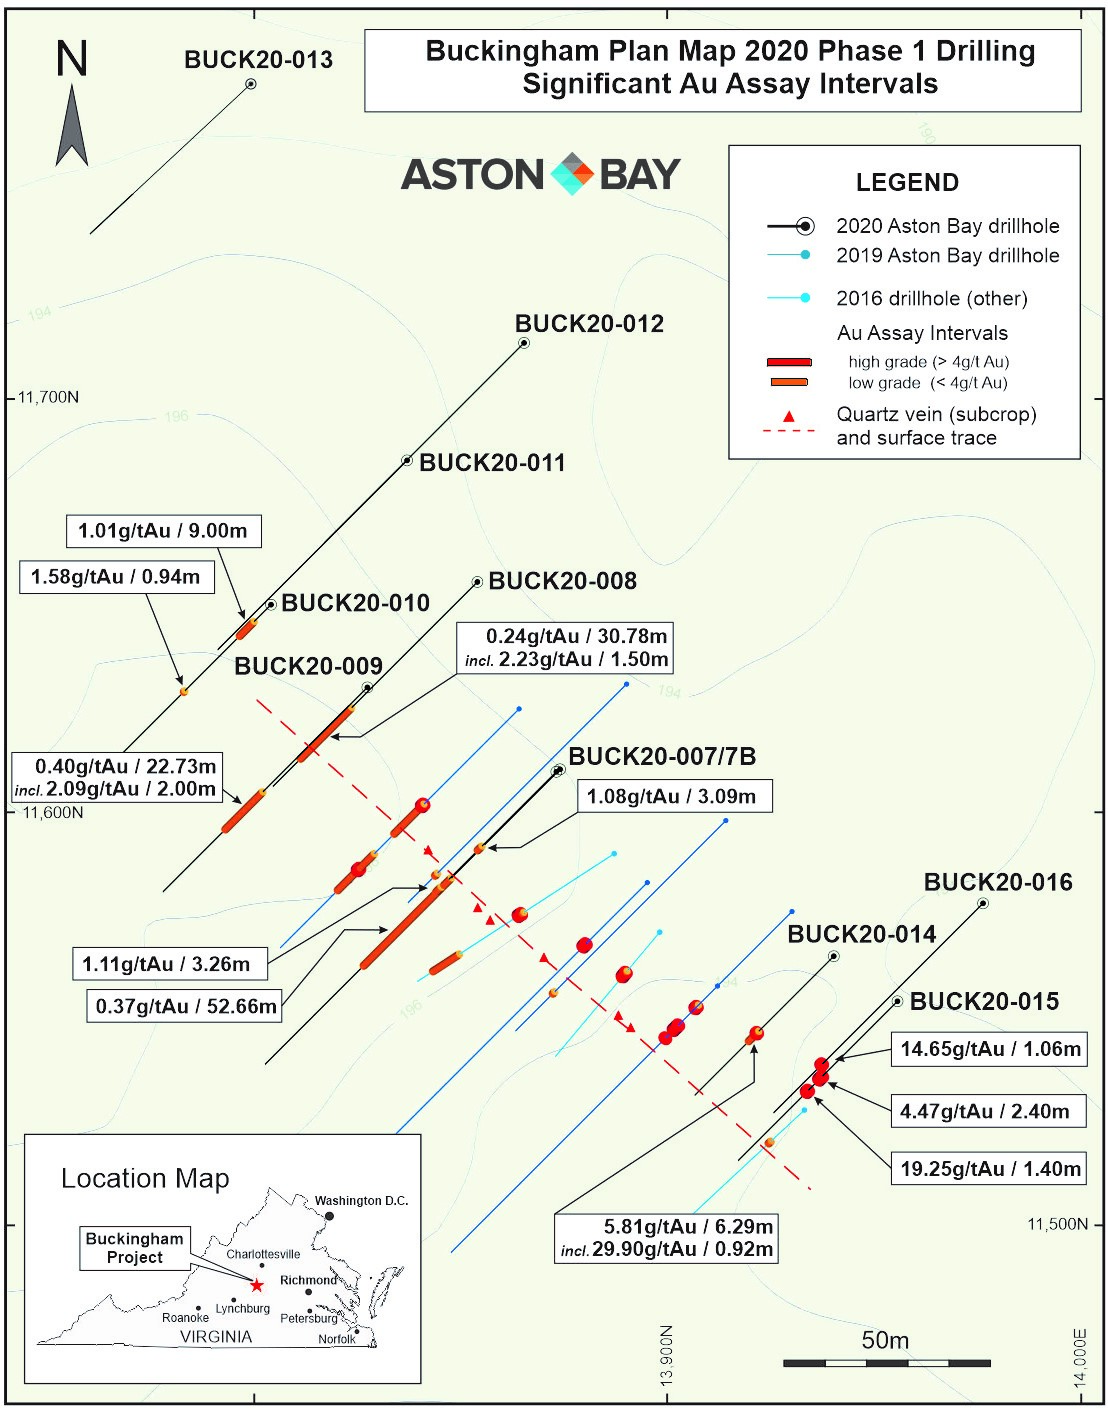 Aston Bay Holdings Ltd, Wednesday, July 22, 2020, Press release picture